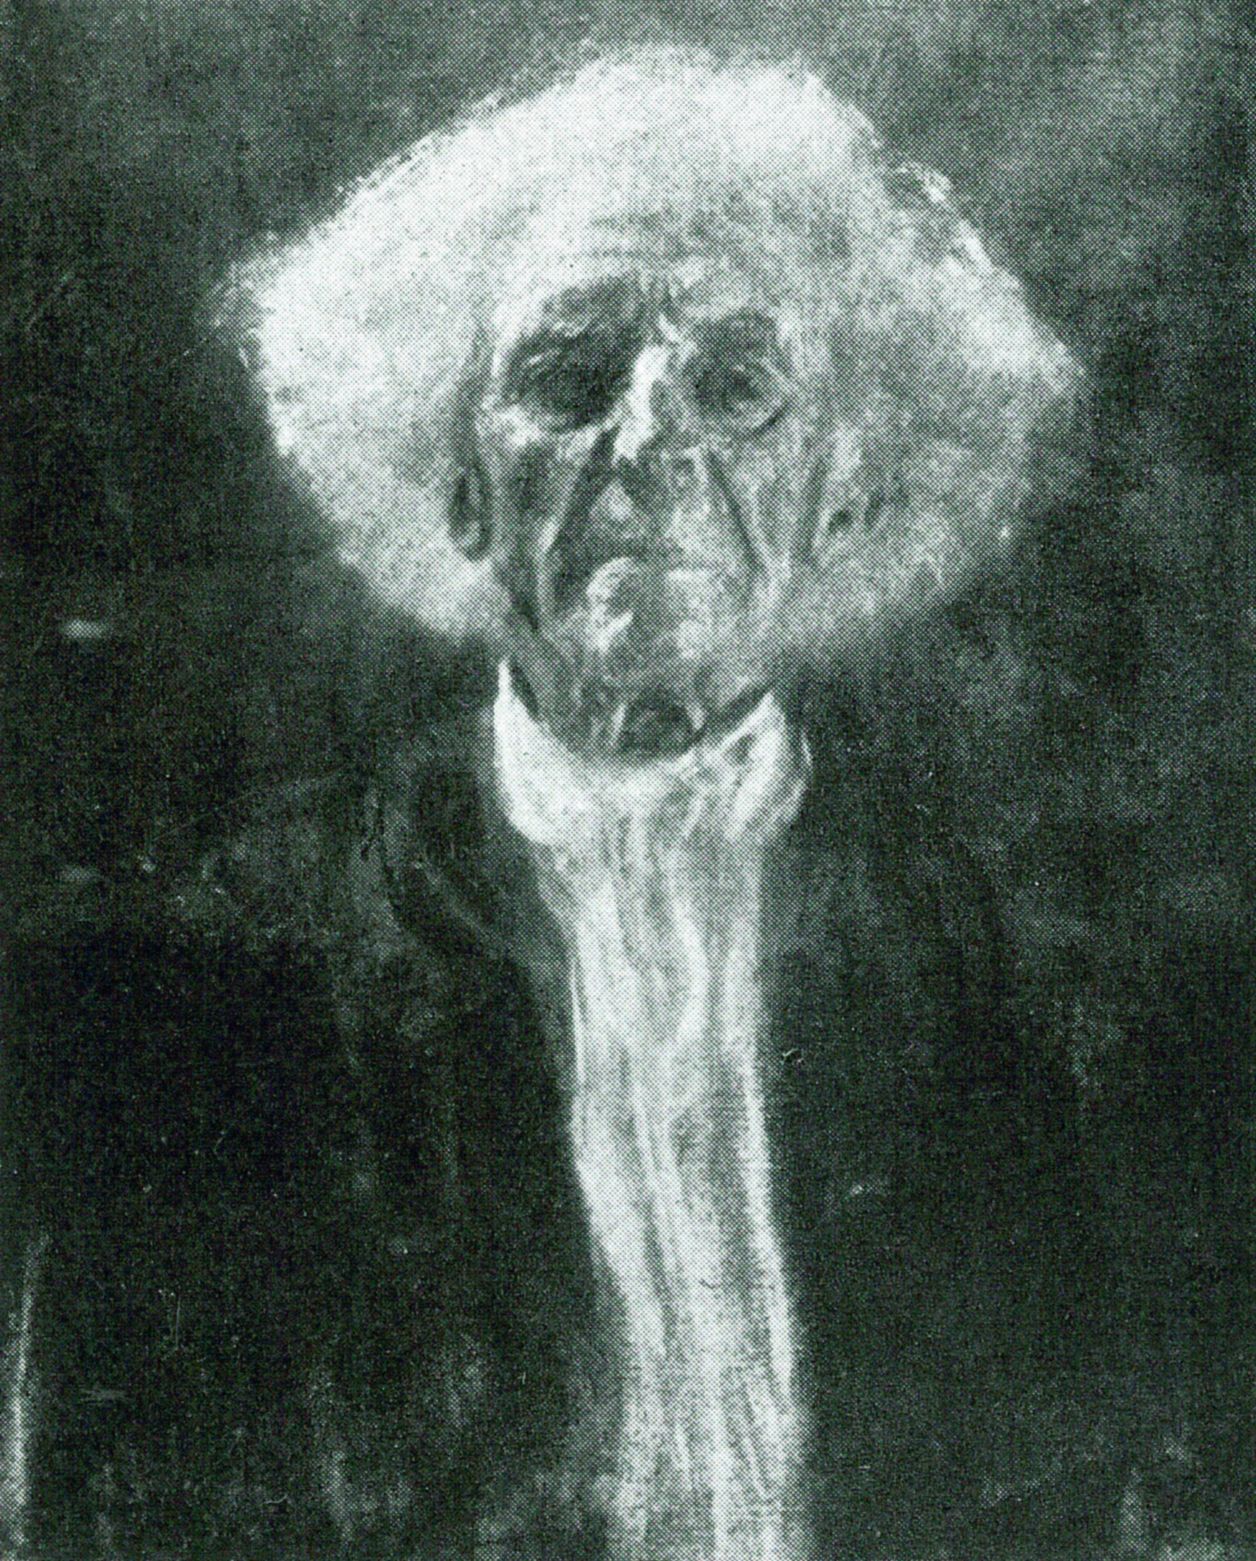 Study of the Head of a Blind Man (1896).